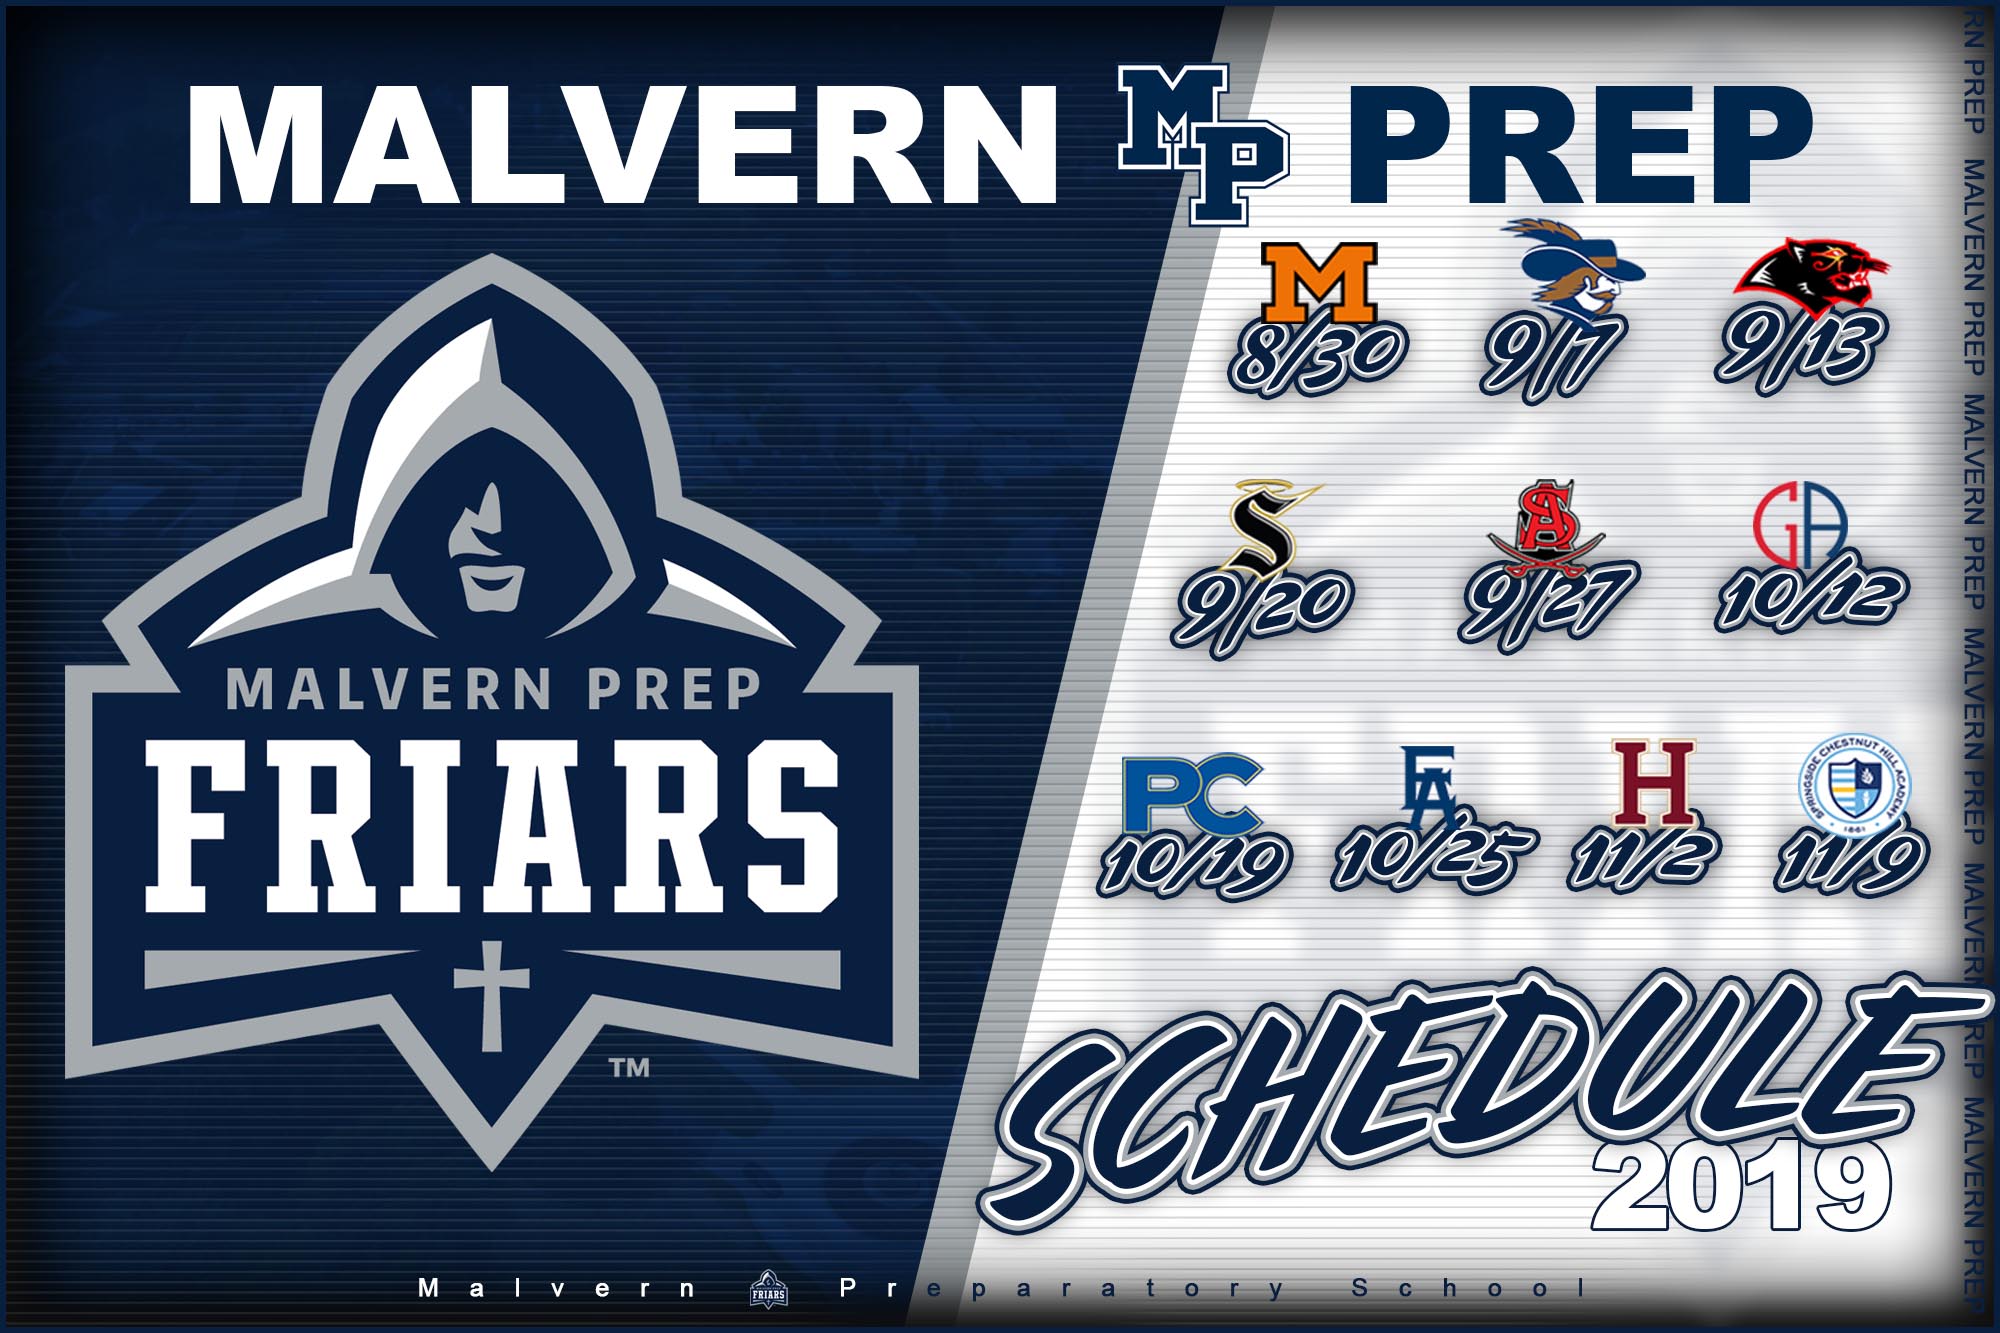 Malvern Prep (PA) Football Team. Home to the Friars 2019 Schedule